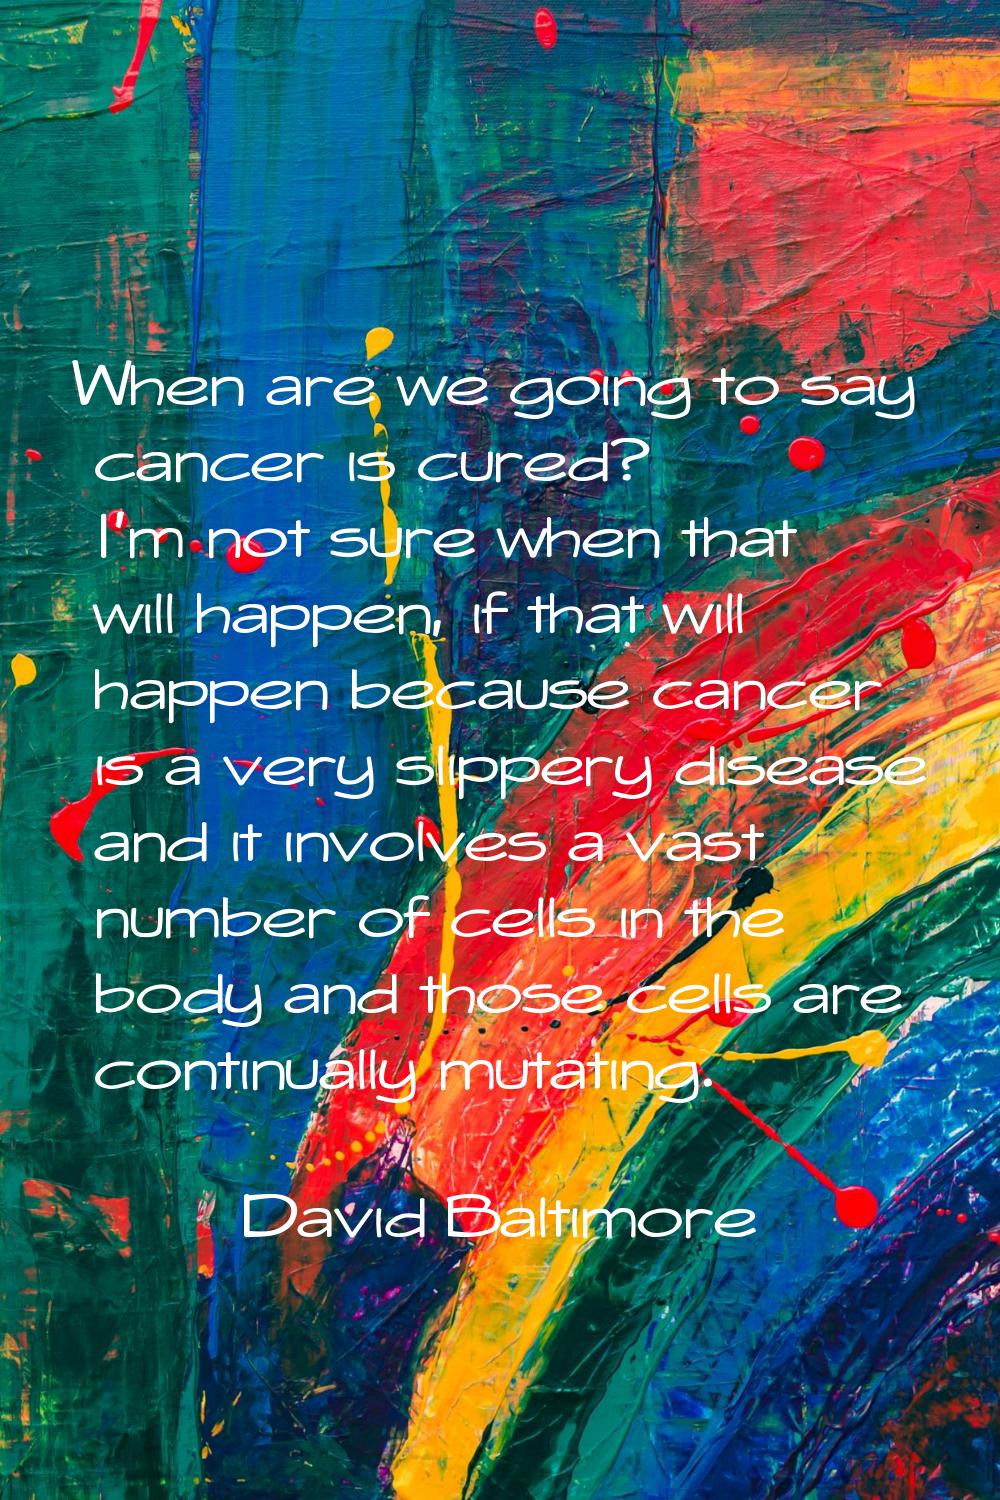 When are we going to say cancer is cured? I'm not sure when that will happen, if that will happen b